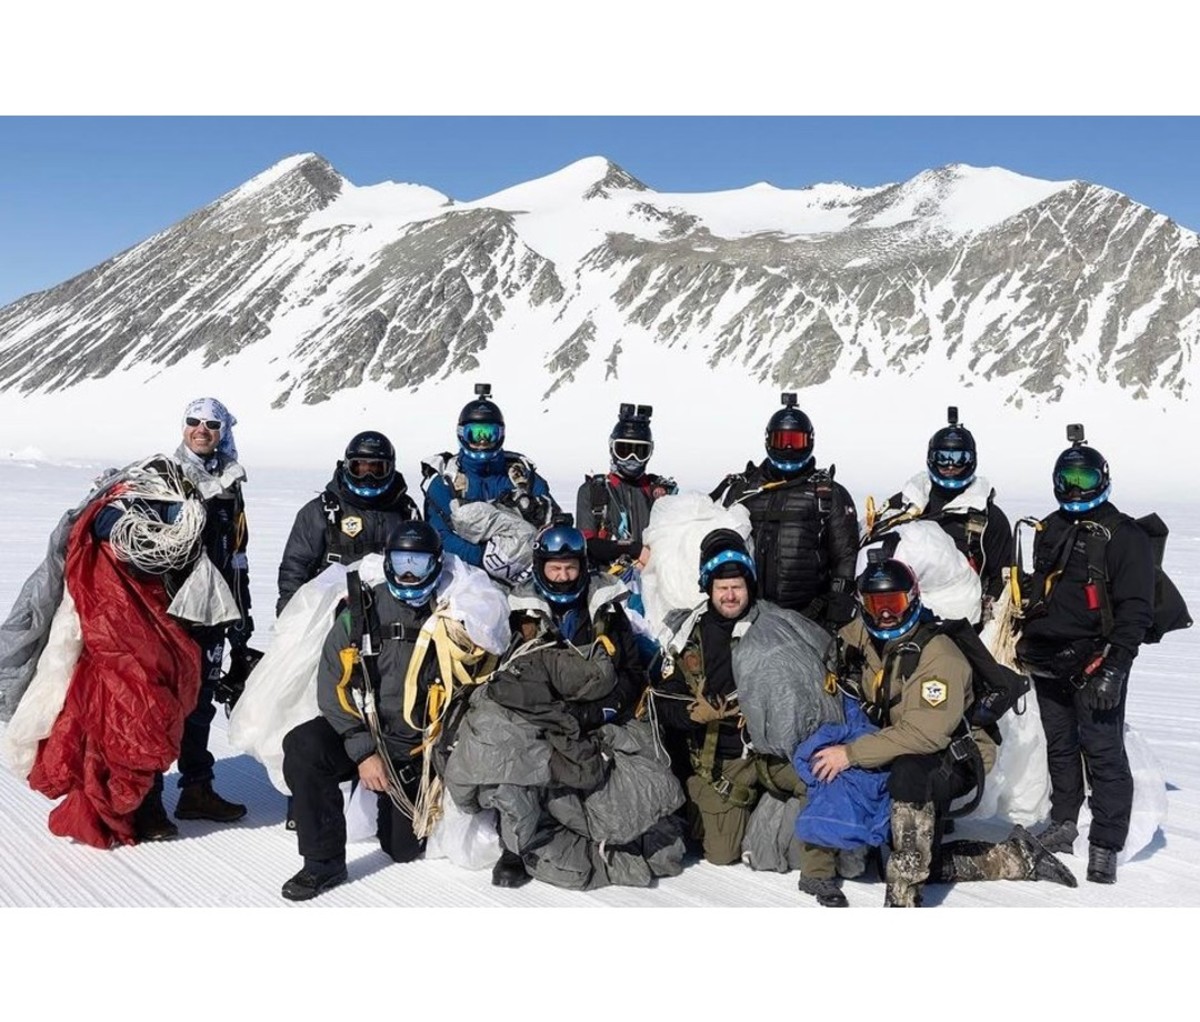 The Triple 7 Expedition team takes a short break for a photo.